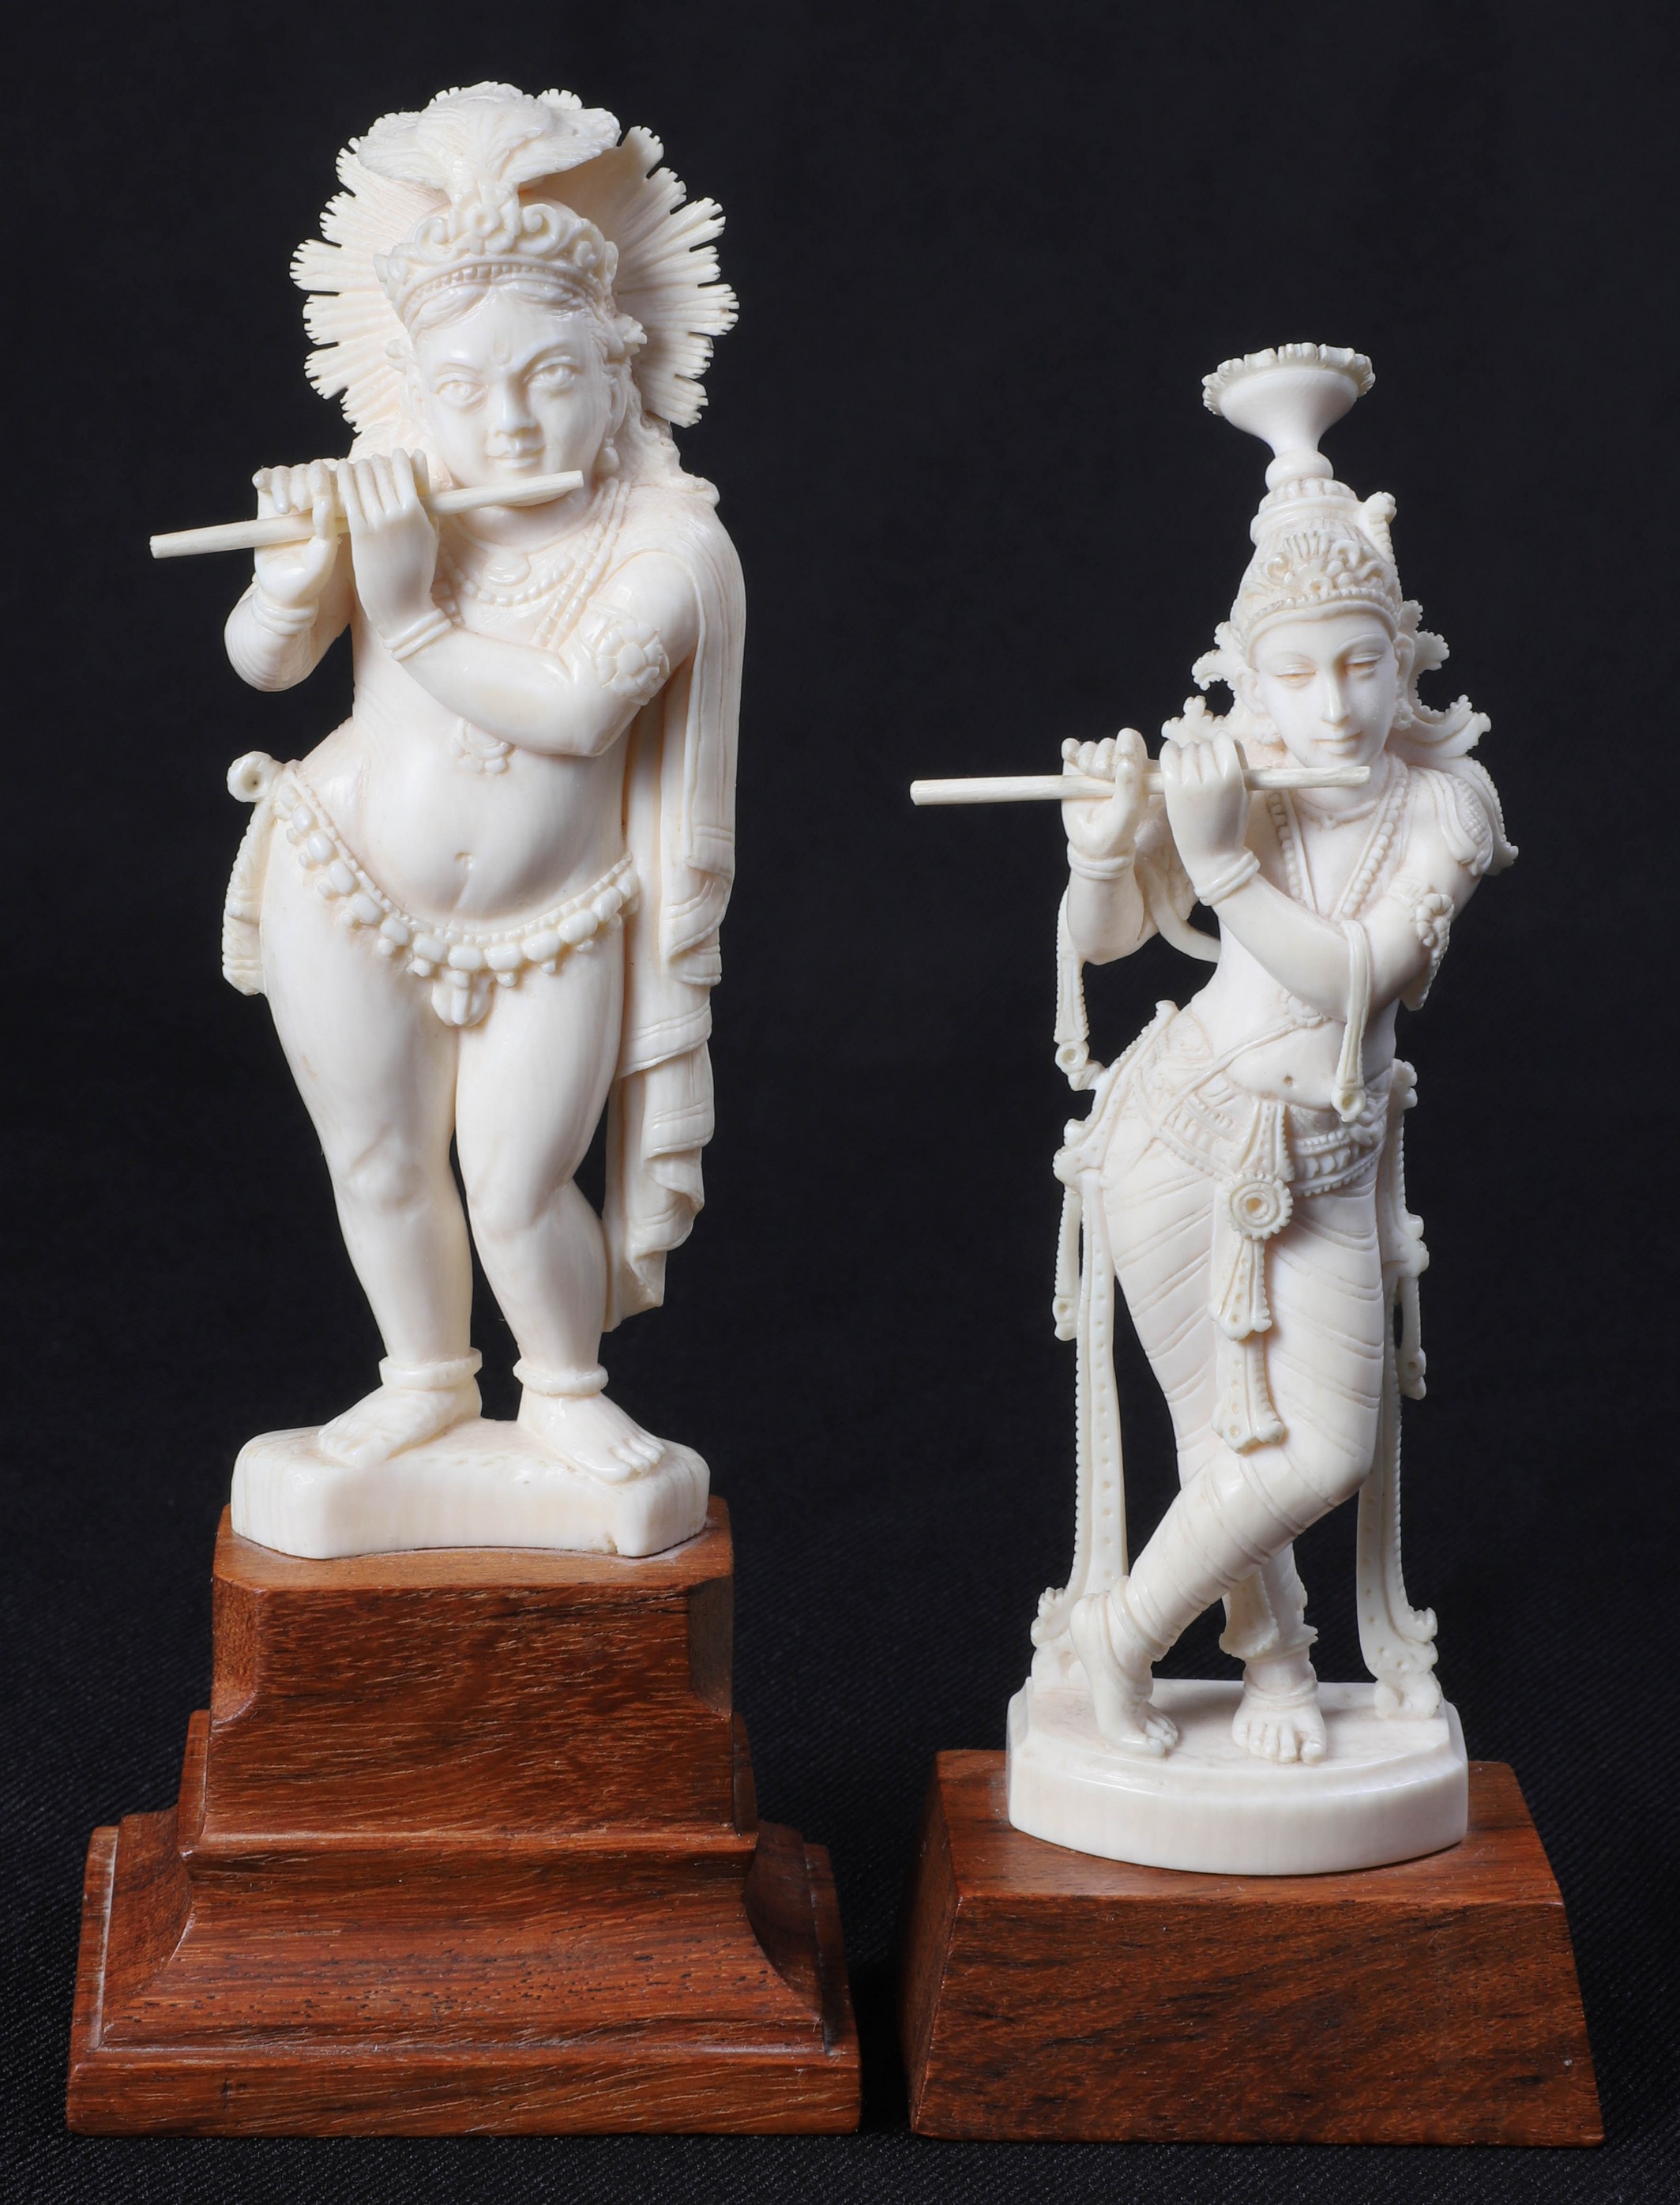  2 Ivory Carvings of Lord Venugopala  2e0d21